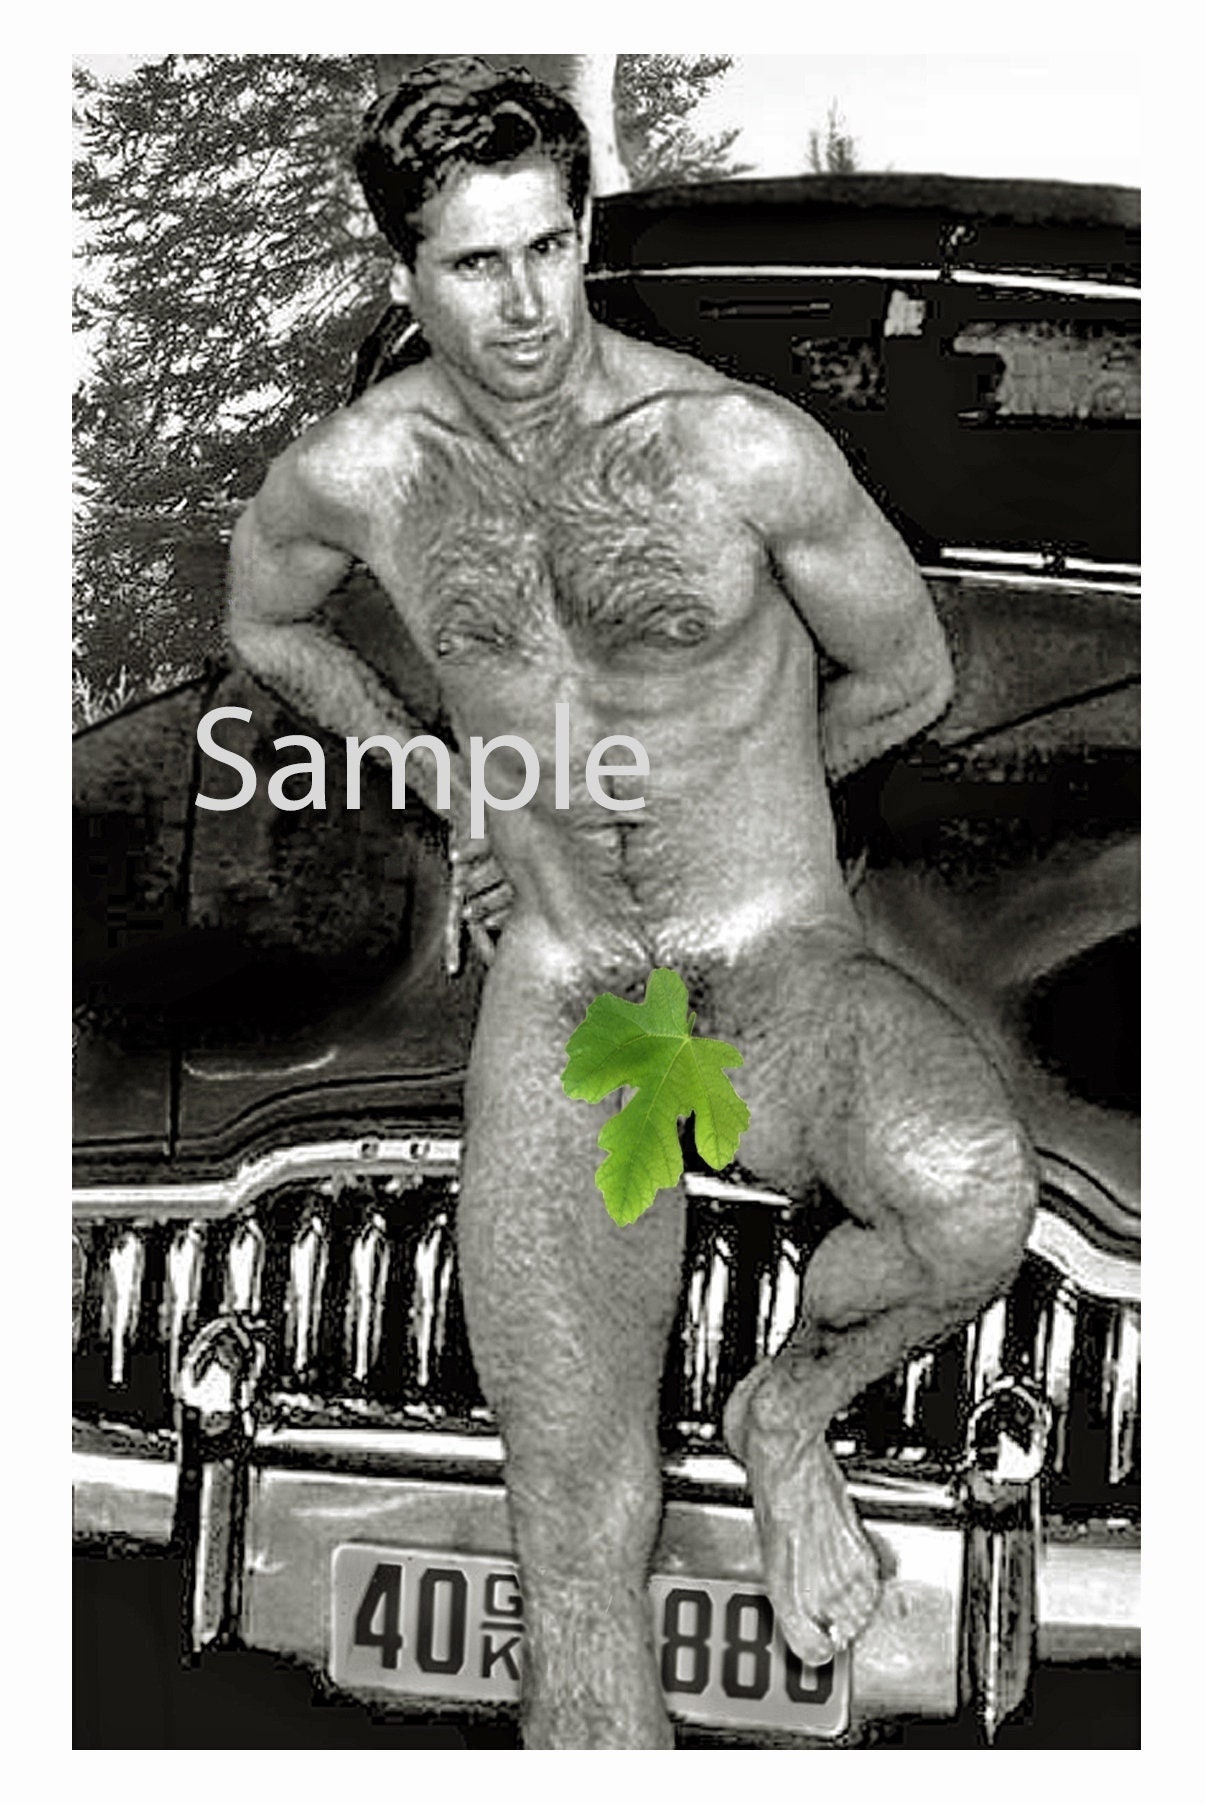 1950s Photo Reprint of a Hairy Muscular Man Posing by pic